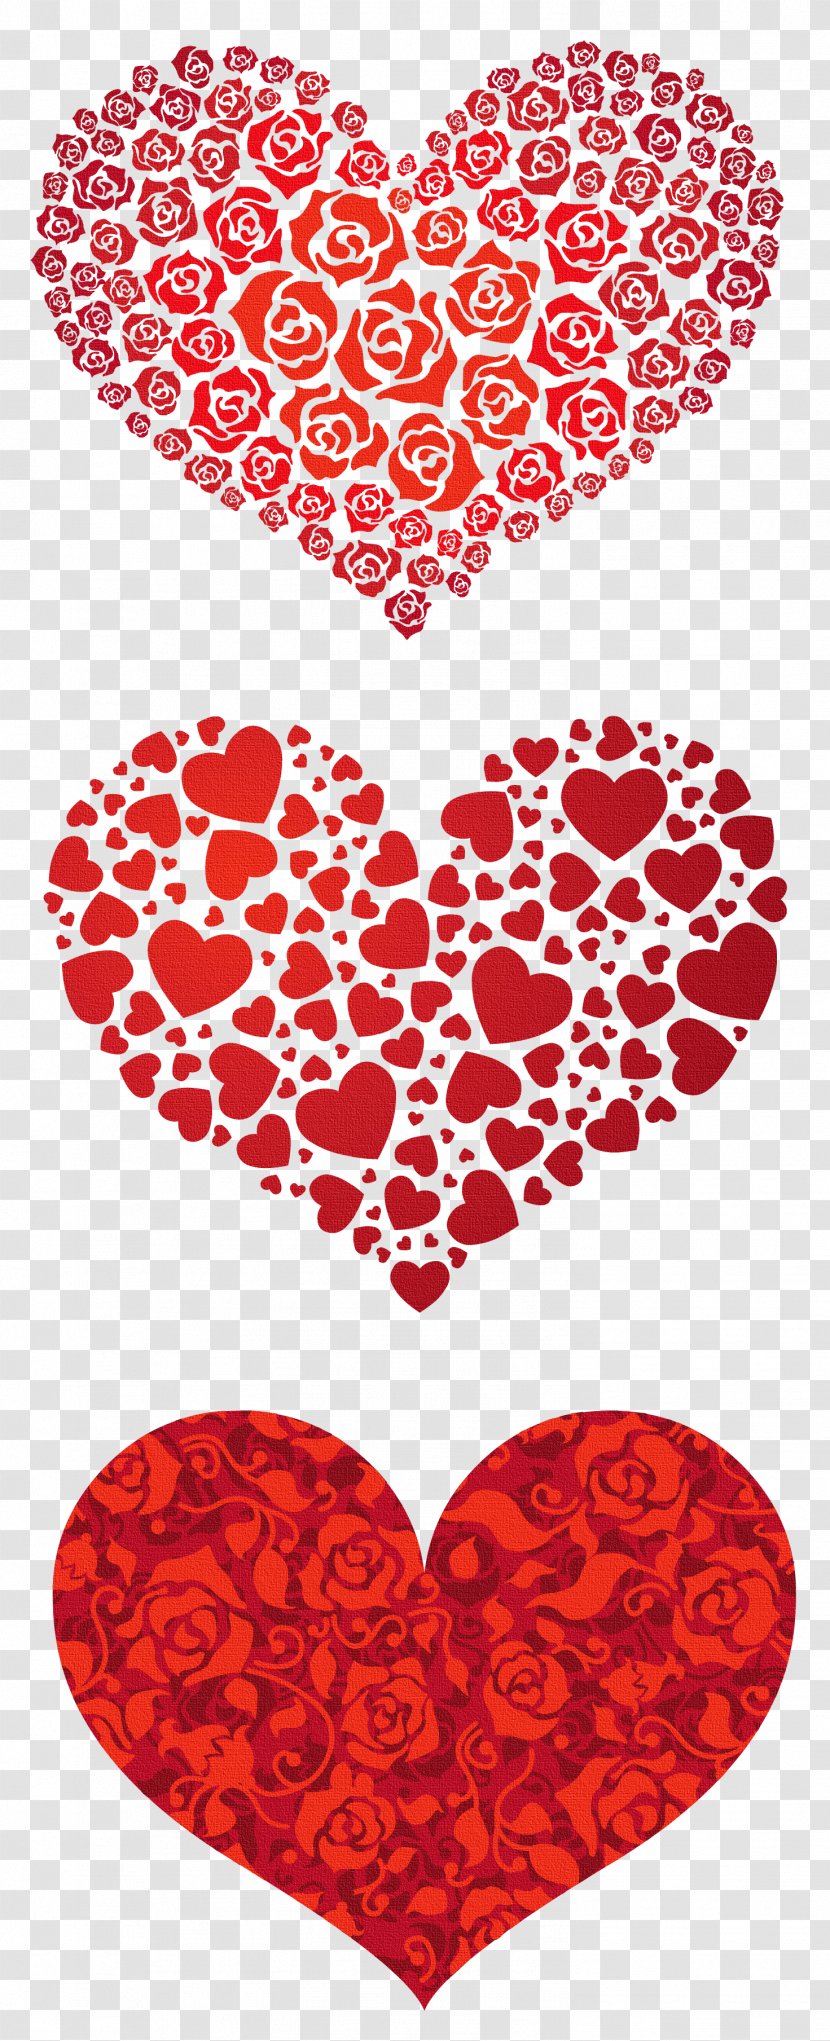 Heart Valentine's Day Clip Art - Silhouette - Red Hearts Transparent Graphics Clipart Transparent PNG